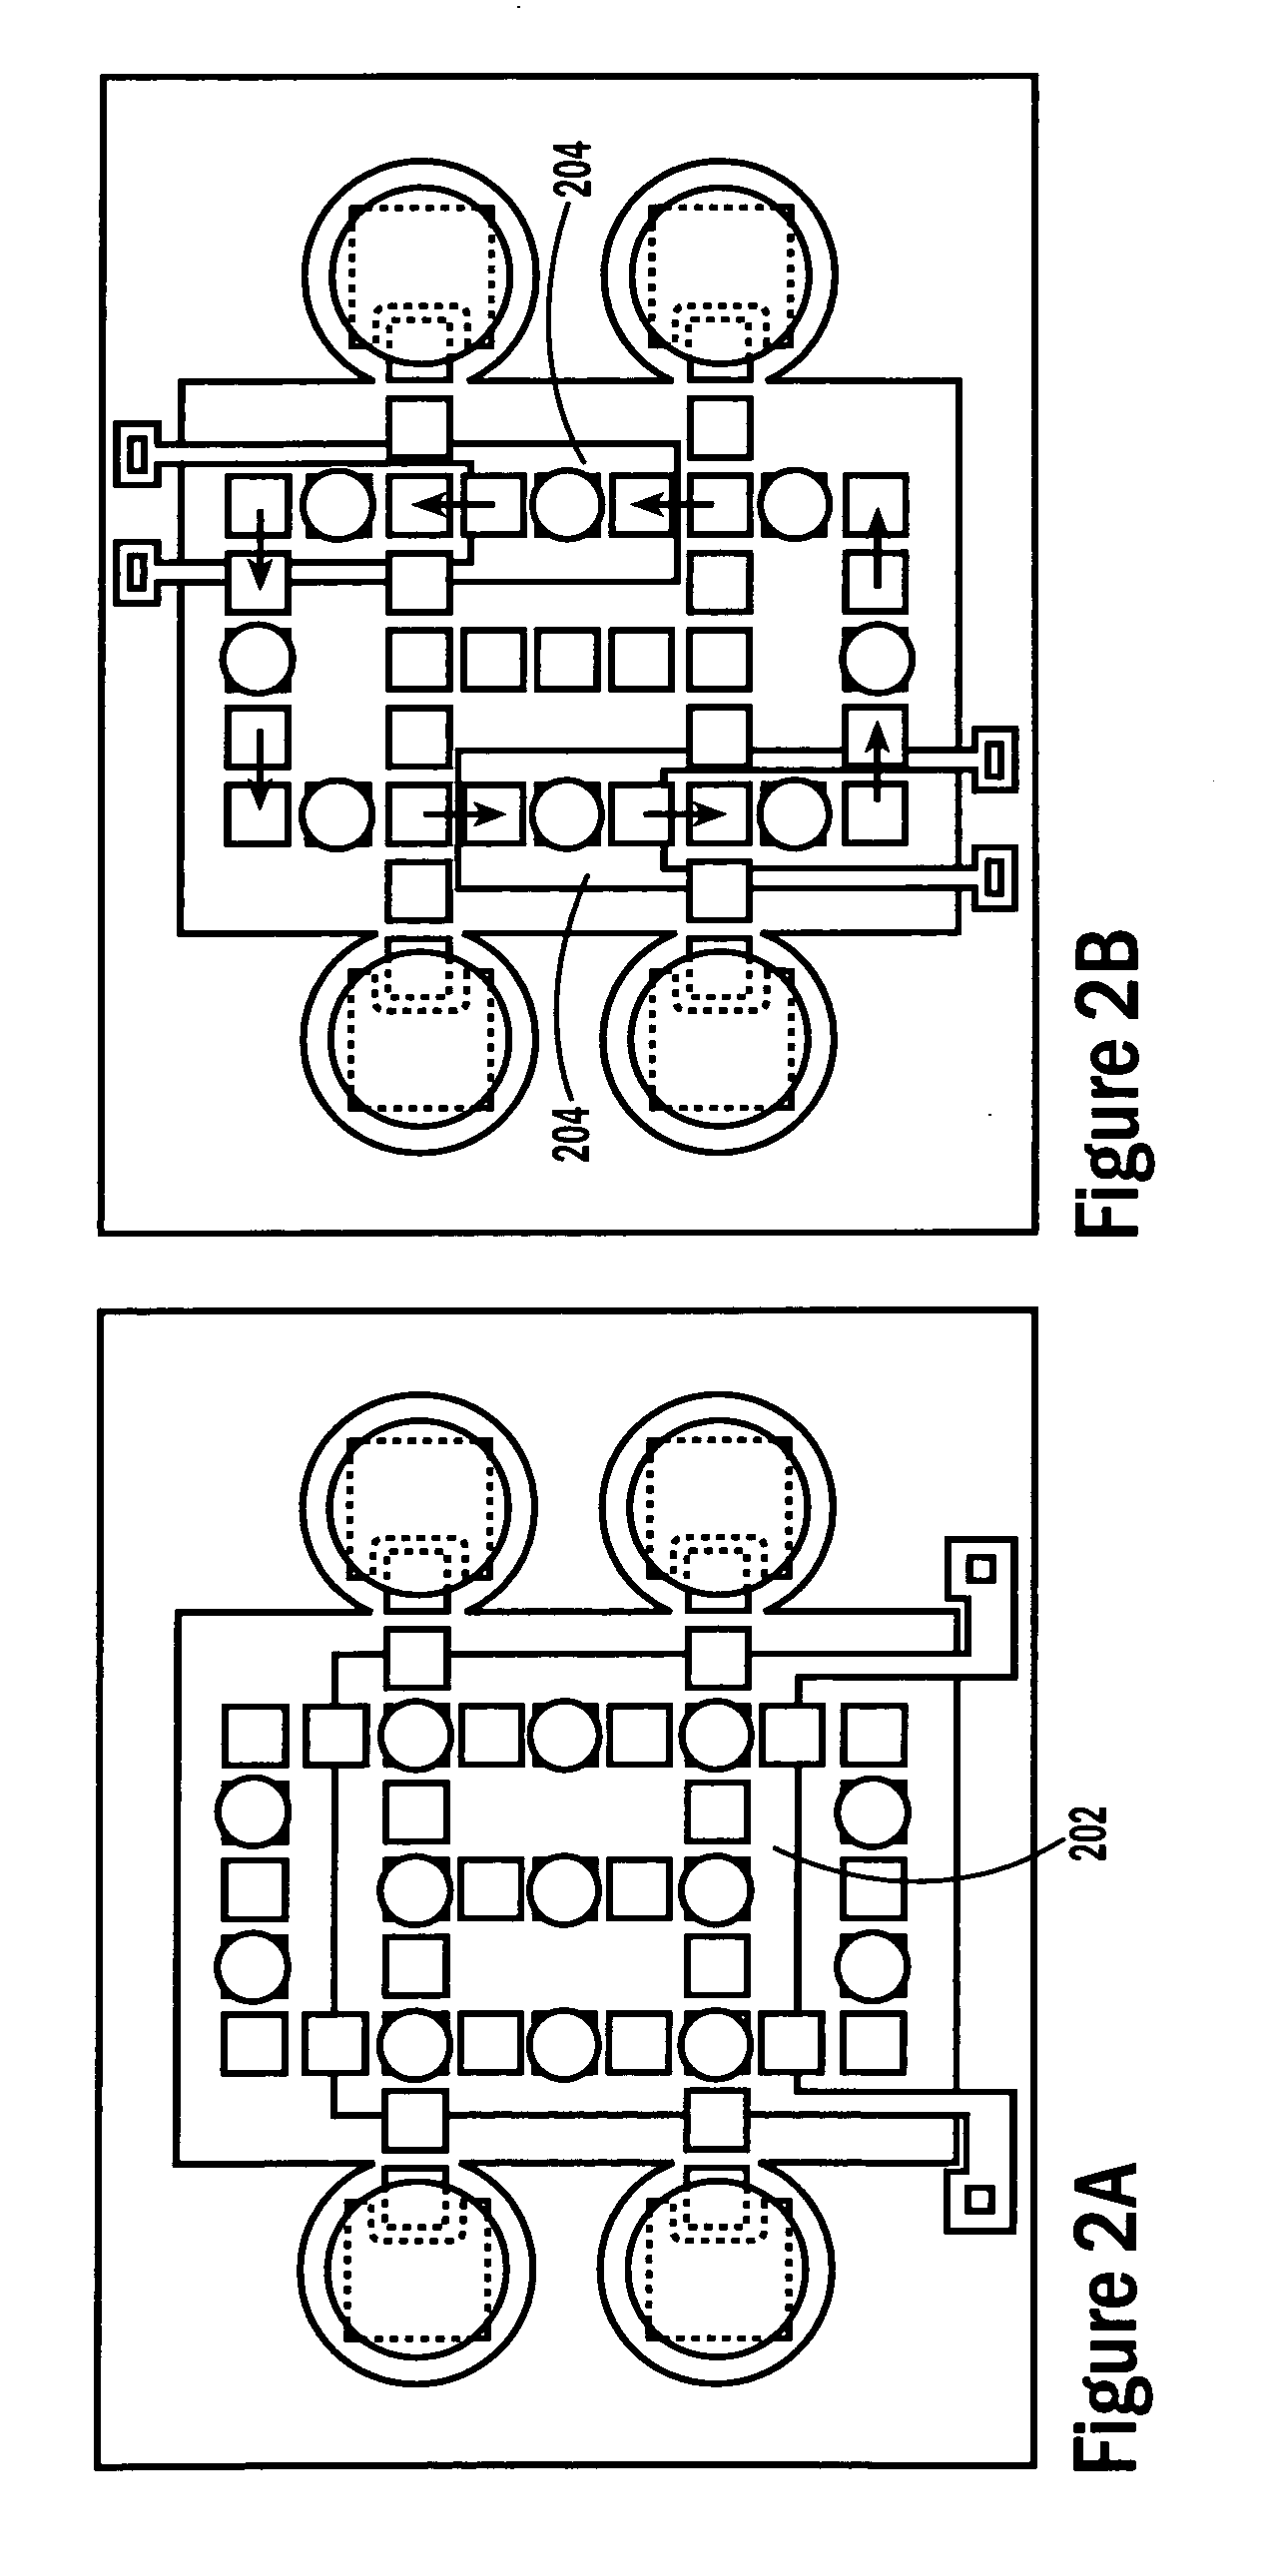 Droplet-based affinity assay device and system